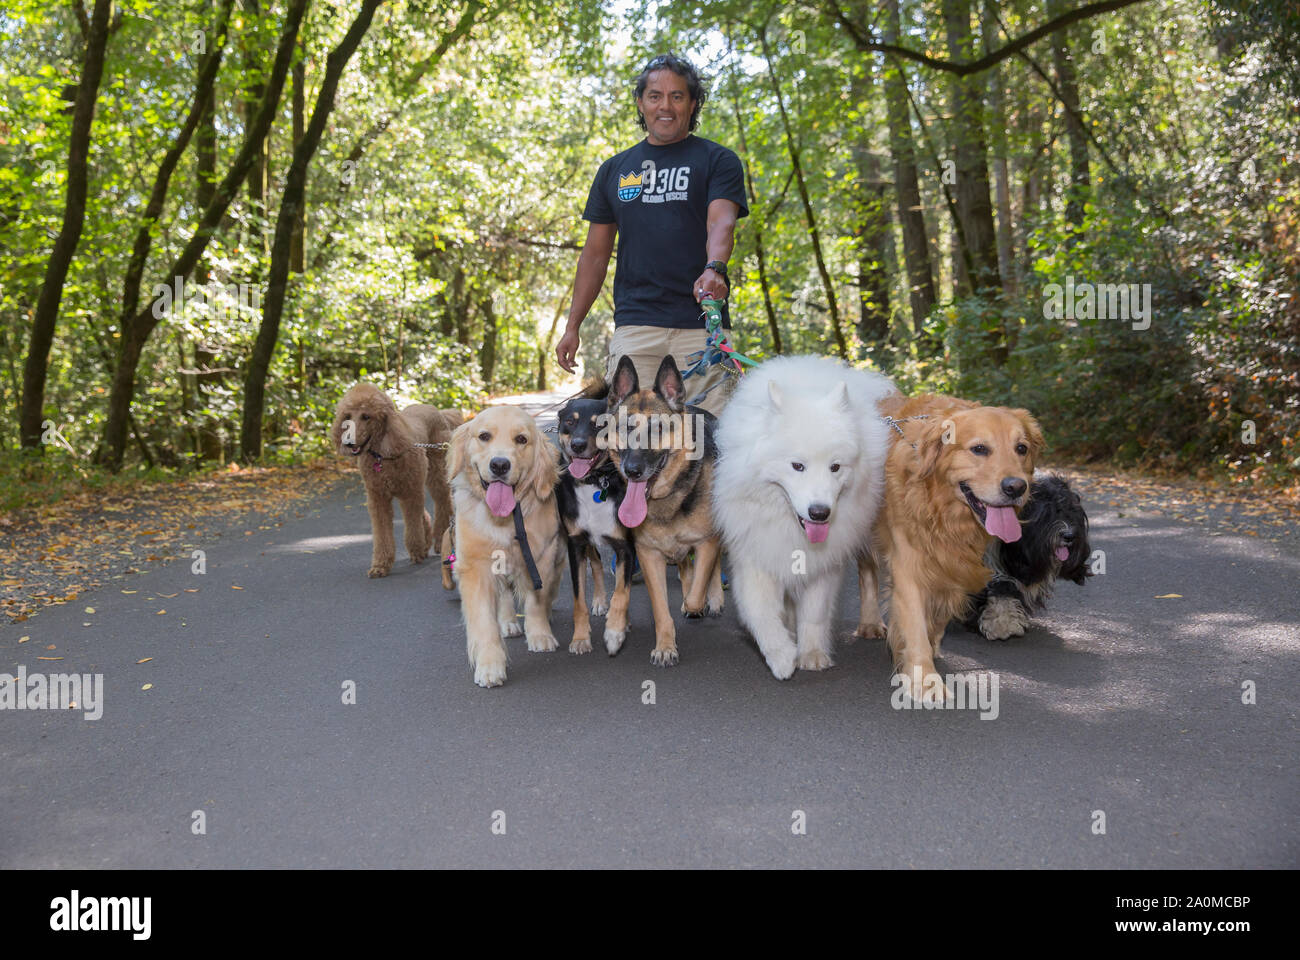 Professional dog walker and trainer Juan Carlos Zuniga taking several different breeds of dogs for a walk in a park. Stock Photo